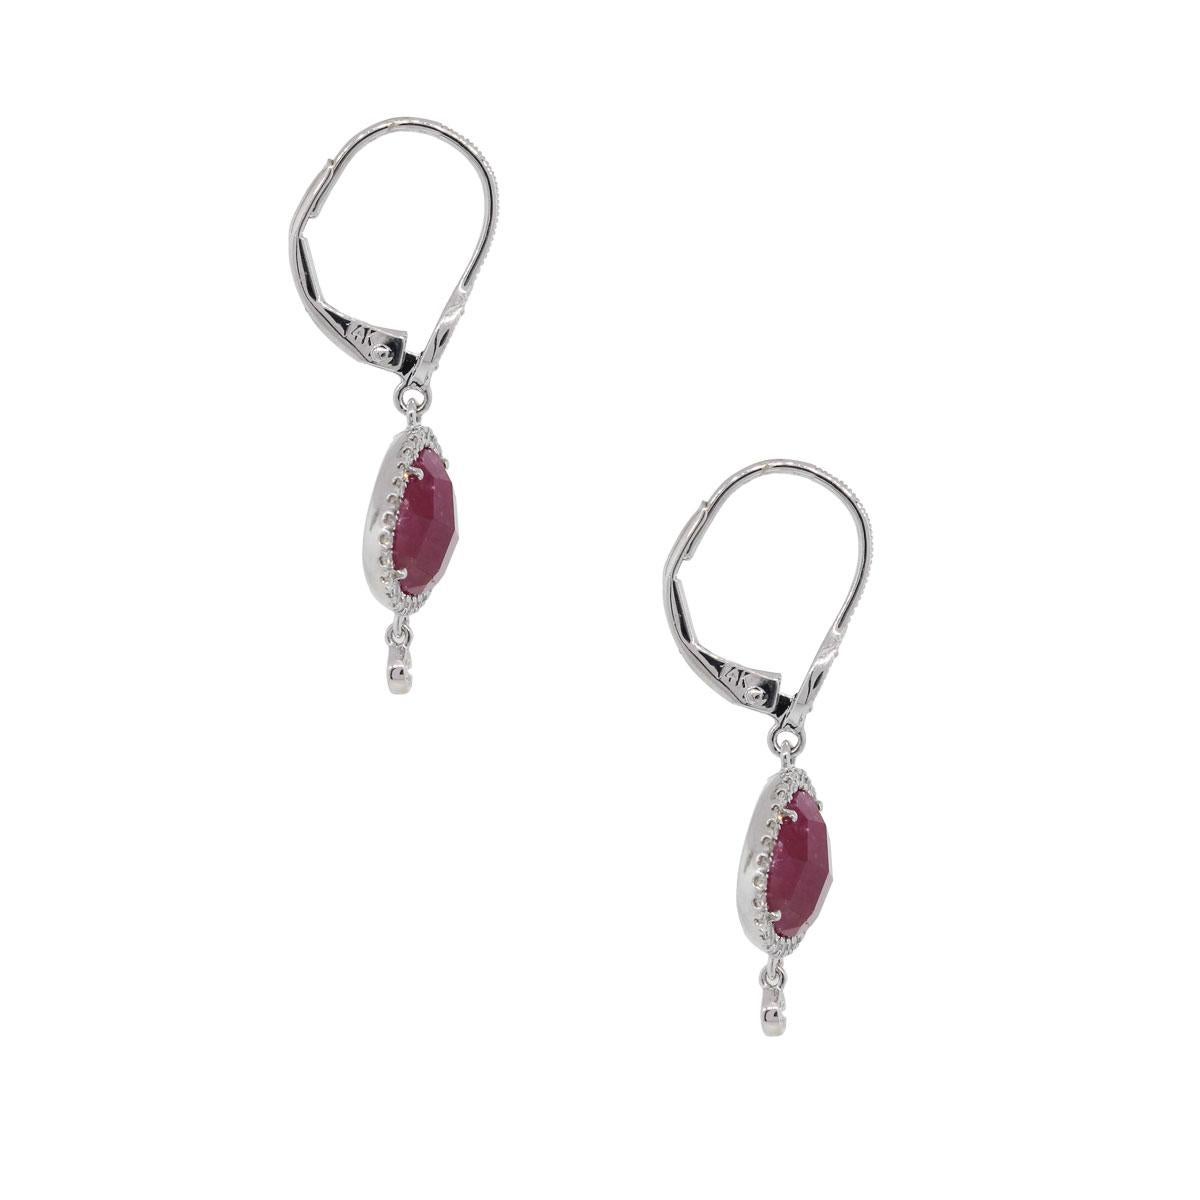 Designer: Meira T
Style: Ruby and Diamond drop earrings
Material: 14k White Gold
Diamond Details: Approximately 0.27ctw of round brilliant diamonds. Diamonds are G/H in color and SI in clarity
Gemstone Details: Approximately 3.94ctw of checkerboard